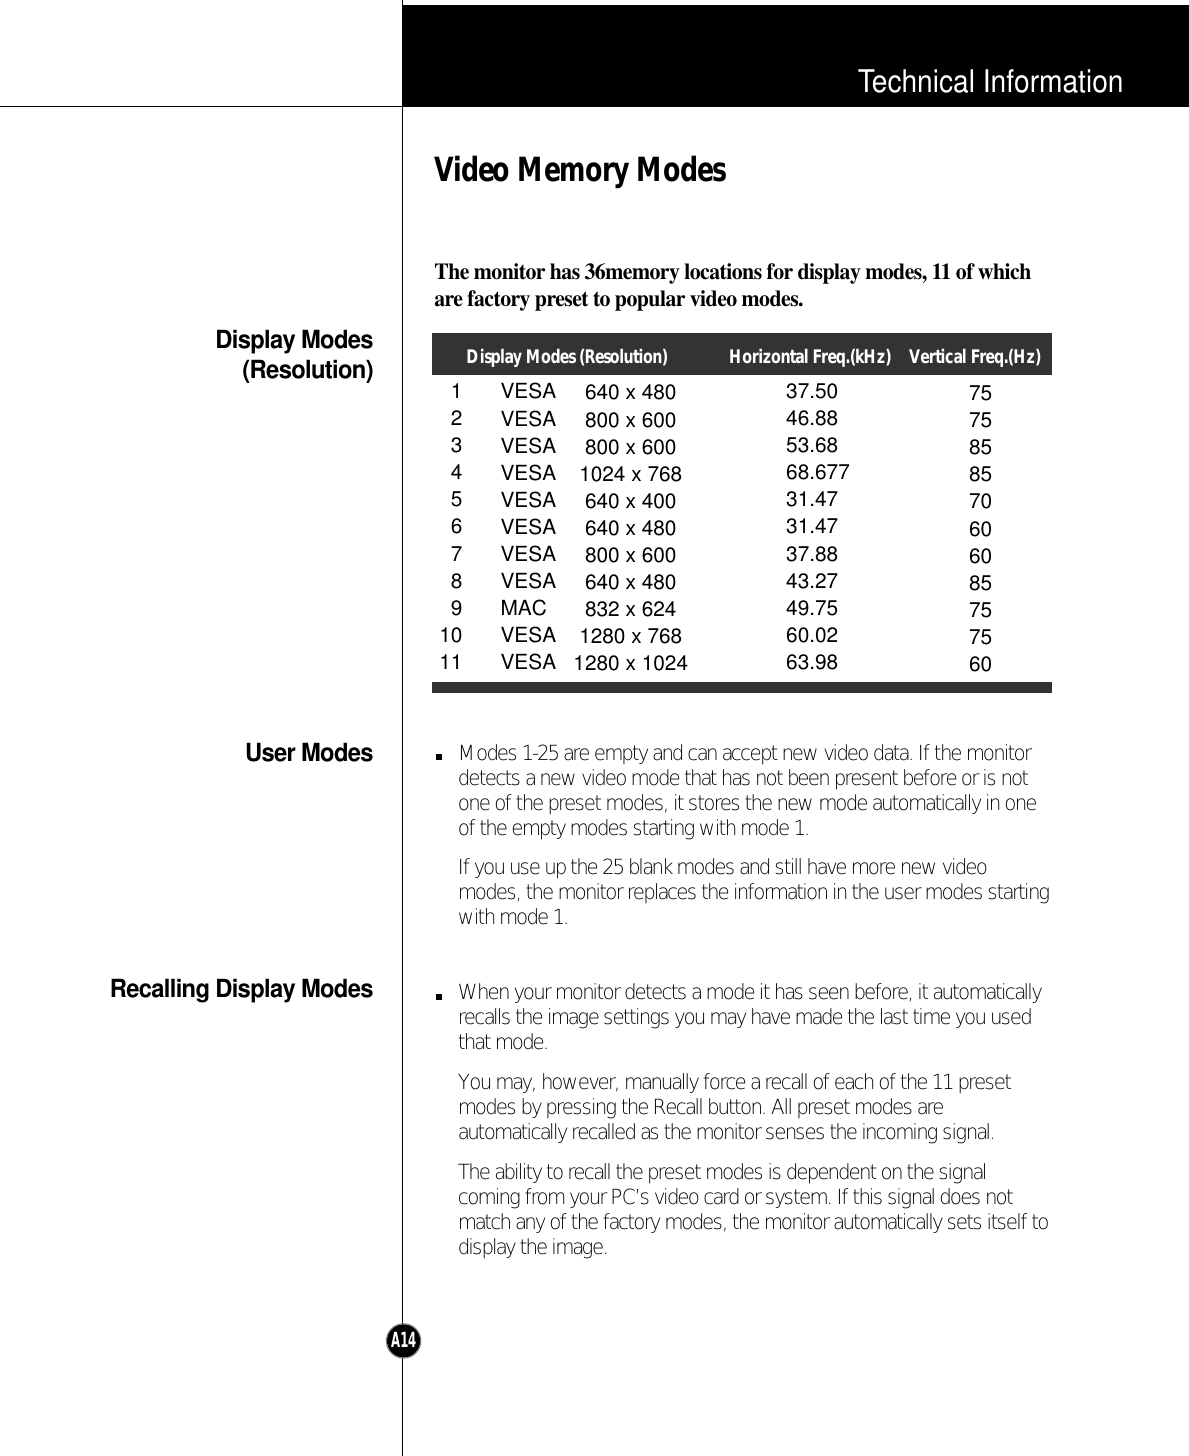 Technical InformationA14Display Modes(Resolution)User ModesRecalling Display ModesVideo Memory ModesThe monitor has 36memory locations for display modes, 11 of whichare factory preset to popular video modes.Modes 1-25 are empty and can accept new video data. If the monitordetects a new video mode that has not been present before or is notone of the preset modes, it stores the new mode automatically in oneof the empty modes starting with mode 1.If you use up the 25 blank modes and still have more new videomodes, the monitor replaces the information in the user modes startingwith mode 1.When your monitor detects a mode it has seen before, it automaticallyrecalls the image settings you may have made the last time you usedthat mode.You may, however, manually force a recall of each of the 11 presetmodes by pressing the Recall button. All preset modes areautomatically recalled as the monitor senses the incoming signal.The ability to recall the preset modes is dependent on the signalcoming from your PC’s video card or system. If this signal does notmatch any of the factory modes, the monitor automatically sets itself todisplay the image.1234567891011640 x 480800 x 600800 x 6001024 x 768640 x 400640 x 480800 x 600640 x 480832 x 6241280 x 7681280 x 102437.5046.8853.6868.67731.4731.4737.8843.2749.7560.0263.987575858570606085757560Display Modes (Resolution) Horizontal Freq.(kHz) Vertical Freq.(Hz)VESAVESAVESAVESAVESAVESAVESAVESAMACVESAVESA